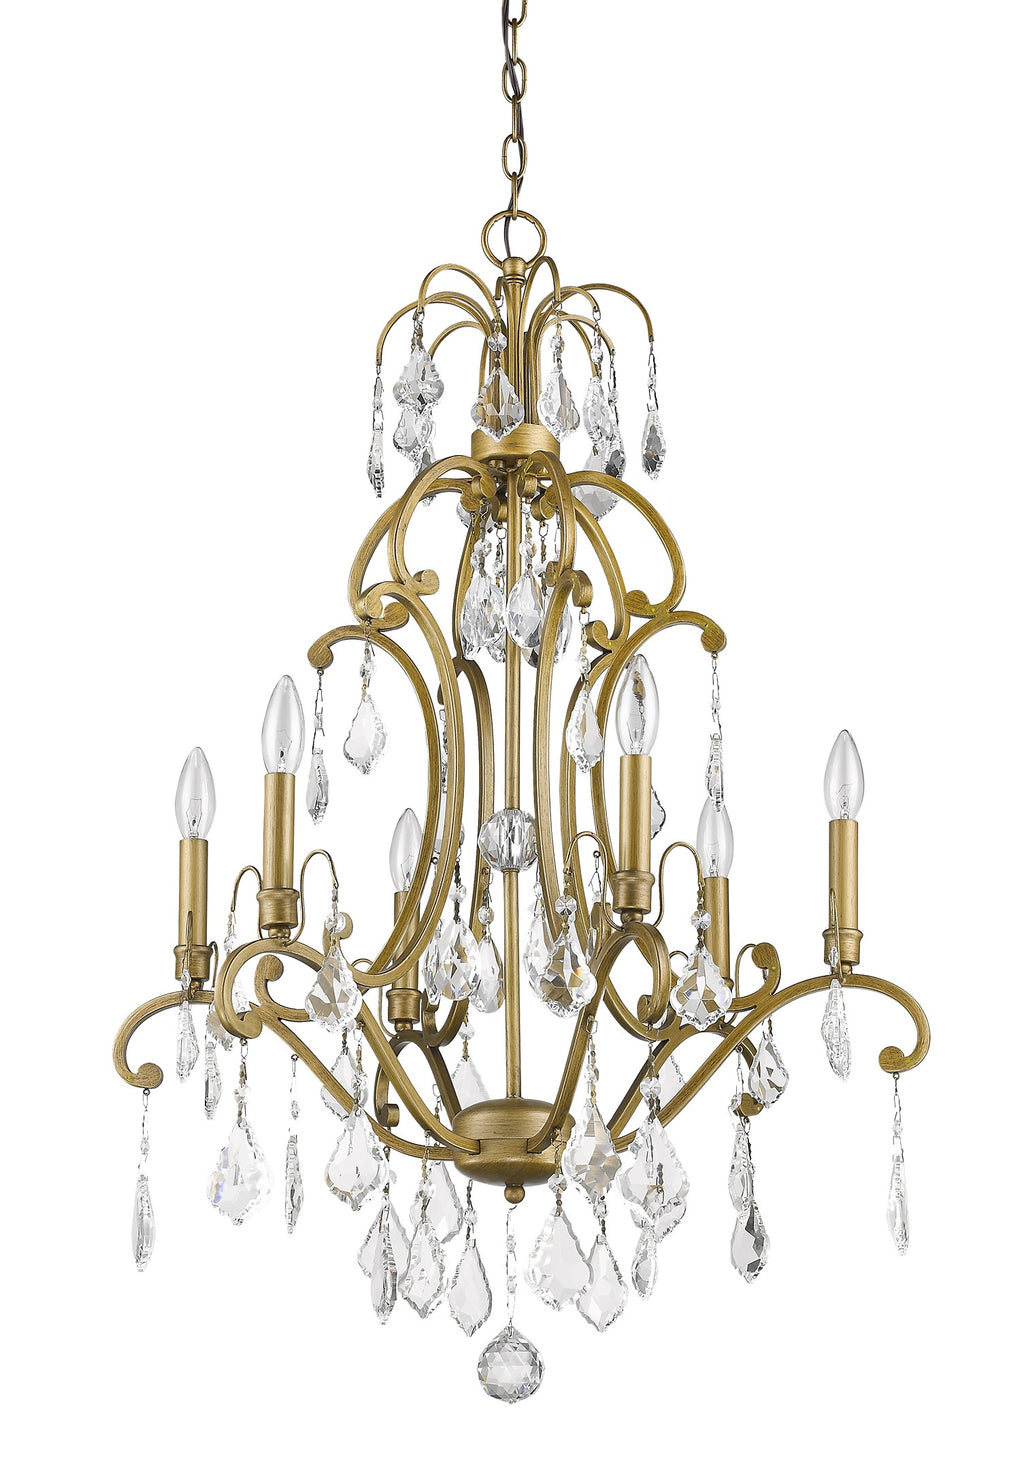 Claire 6-Light Antique Gold Chandelier With Crystal Accents - 99fab 